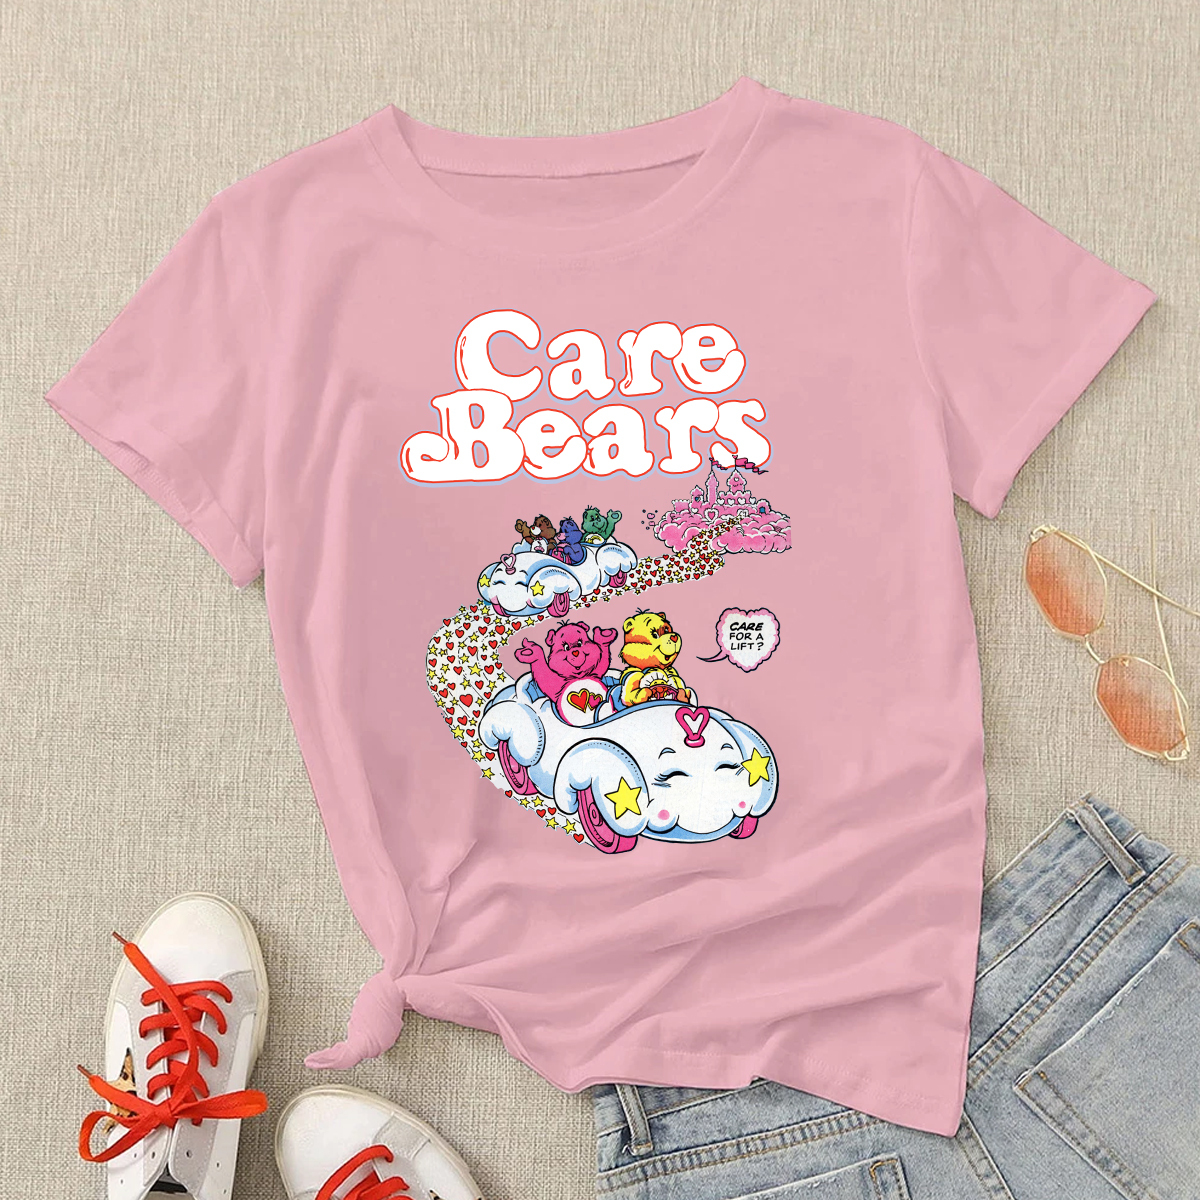 Care Bears vintage Shirt, Bears Party Shirt for Friends Groups,Rainbow ...